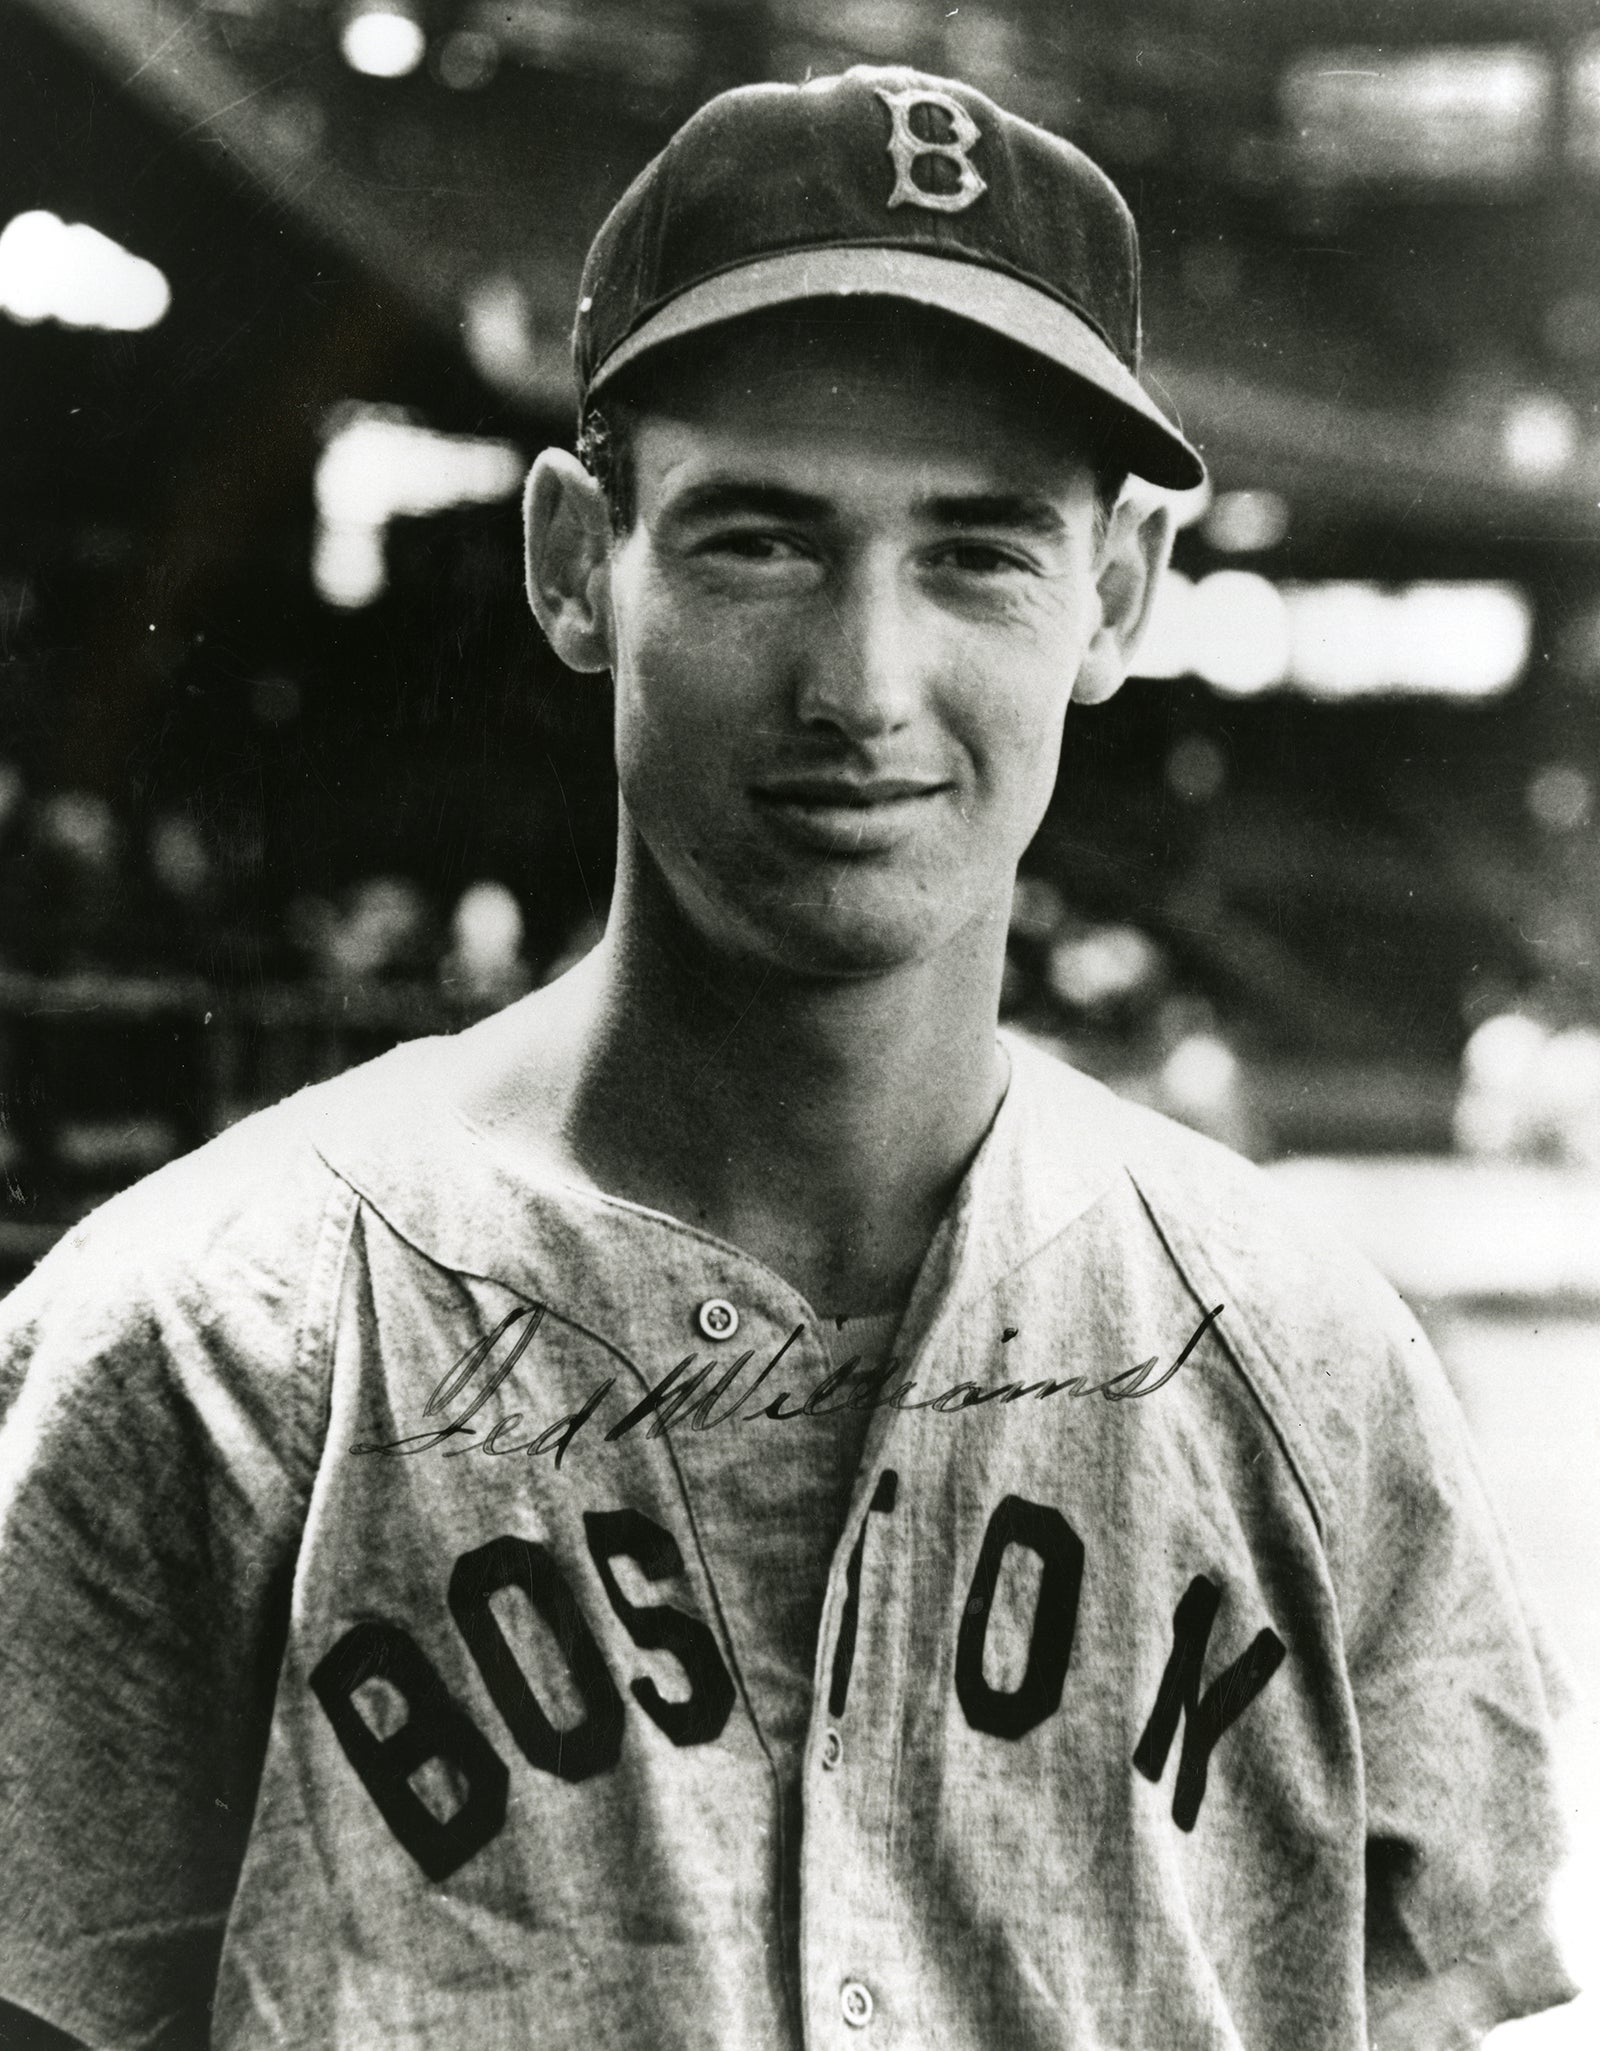 Ted Williams wins 1946 American League MVP